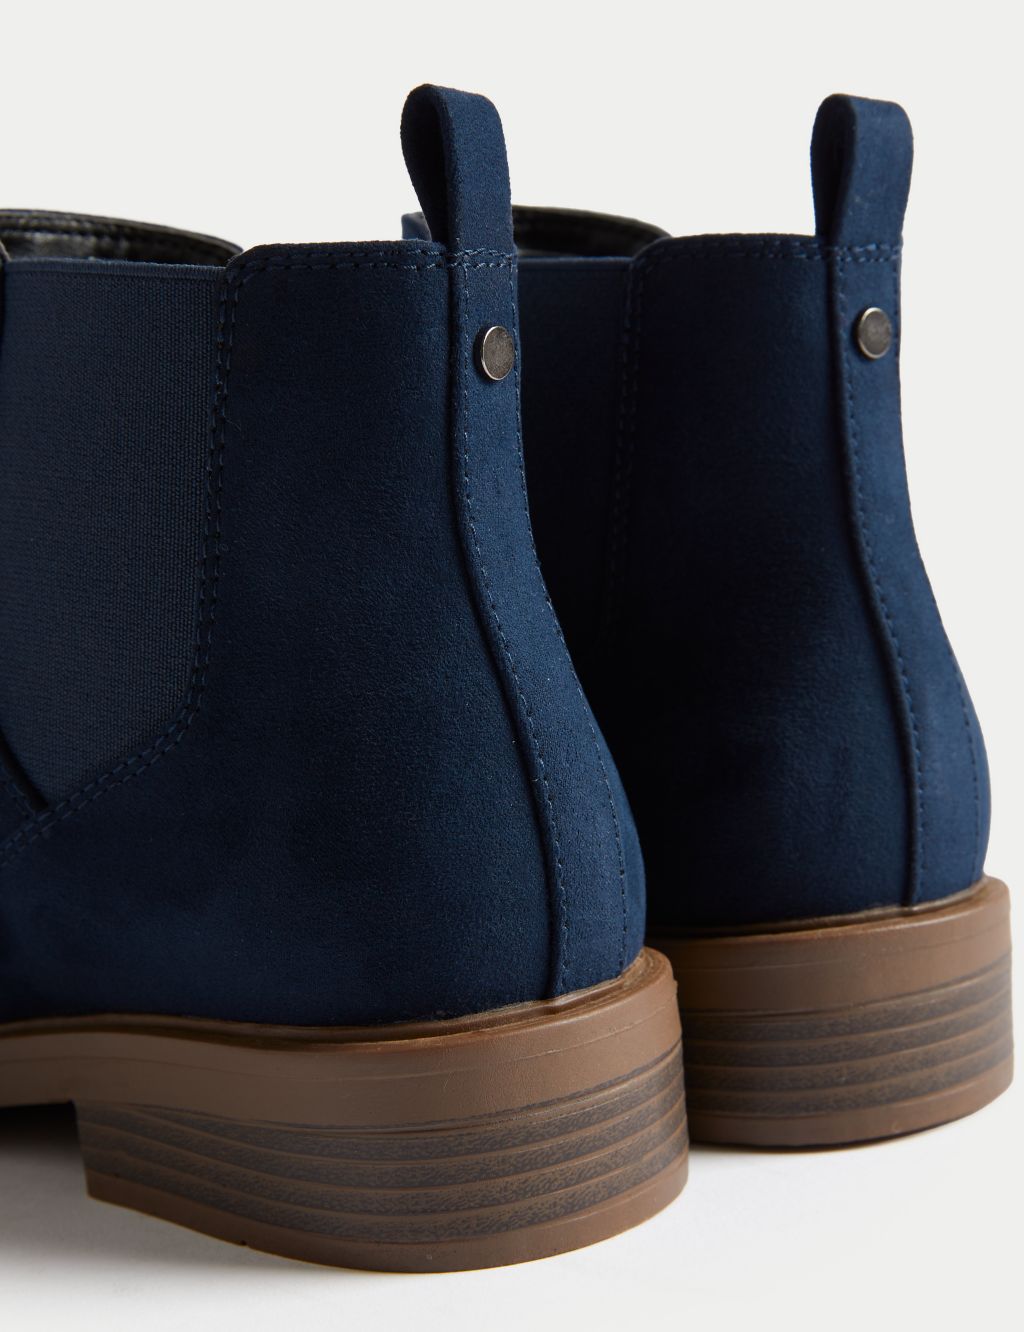 Chelsea Ankle Boots image 3